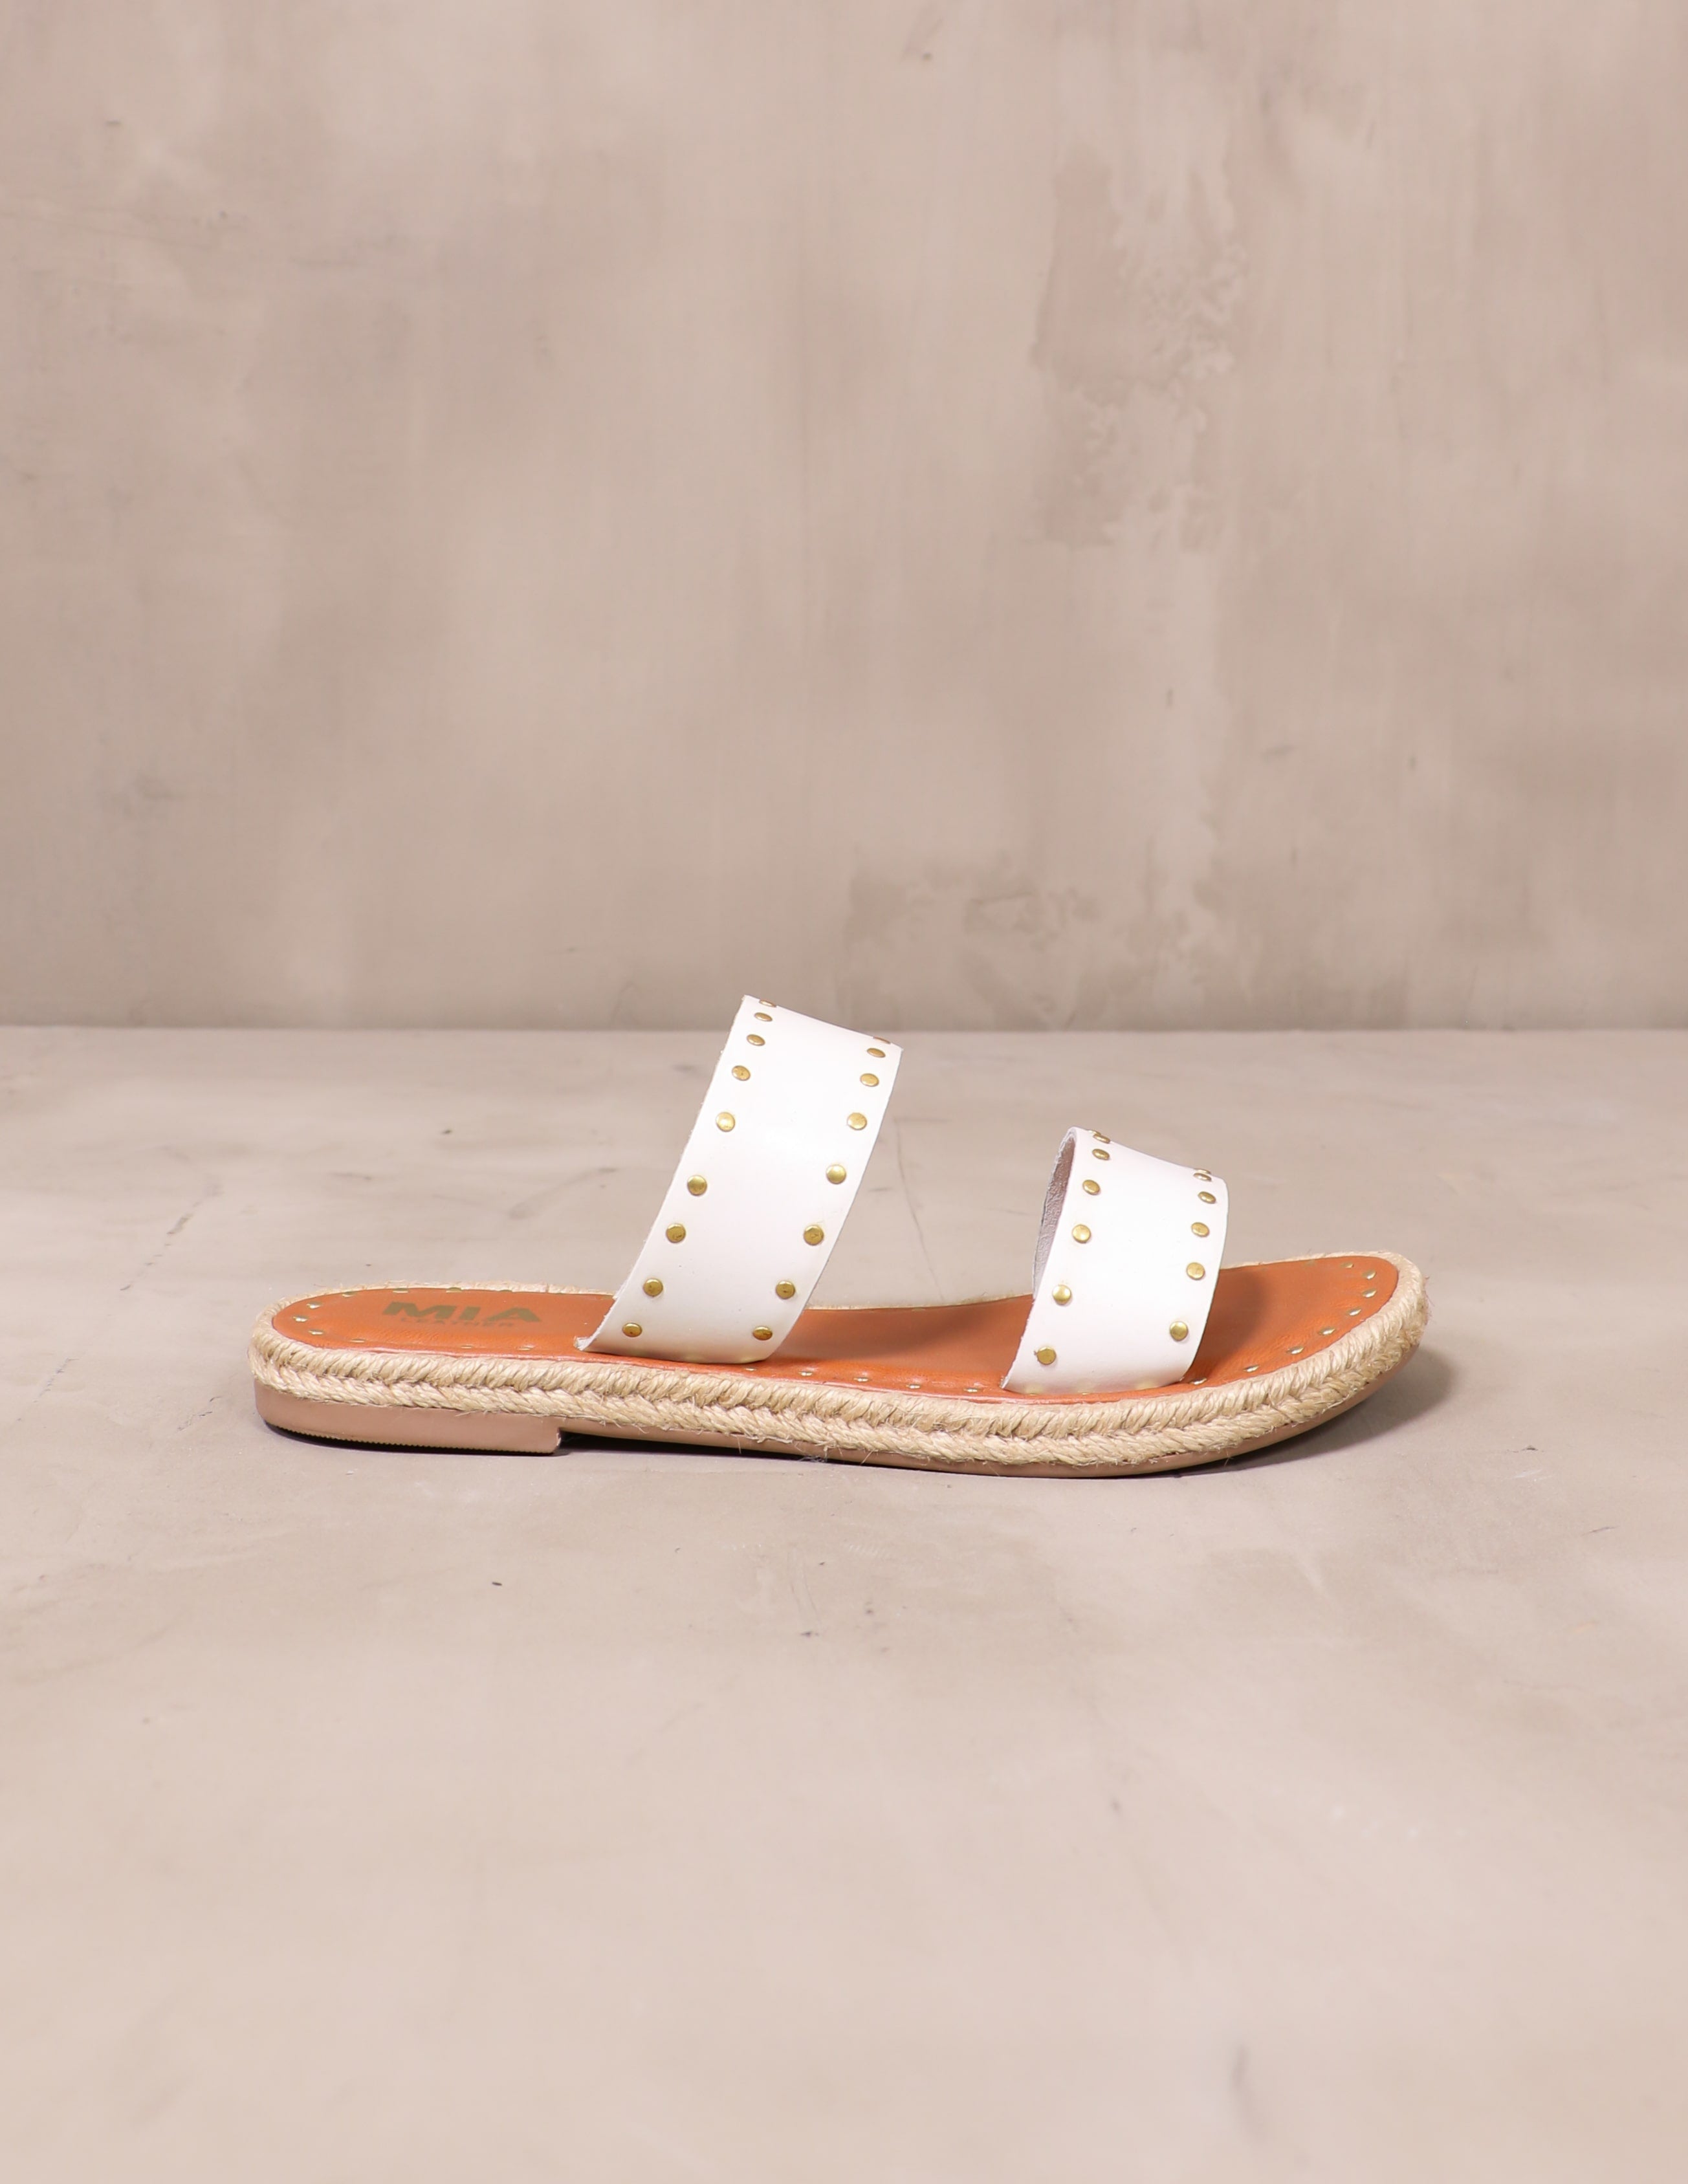 white let the stud times roll sandal on cement background